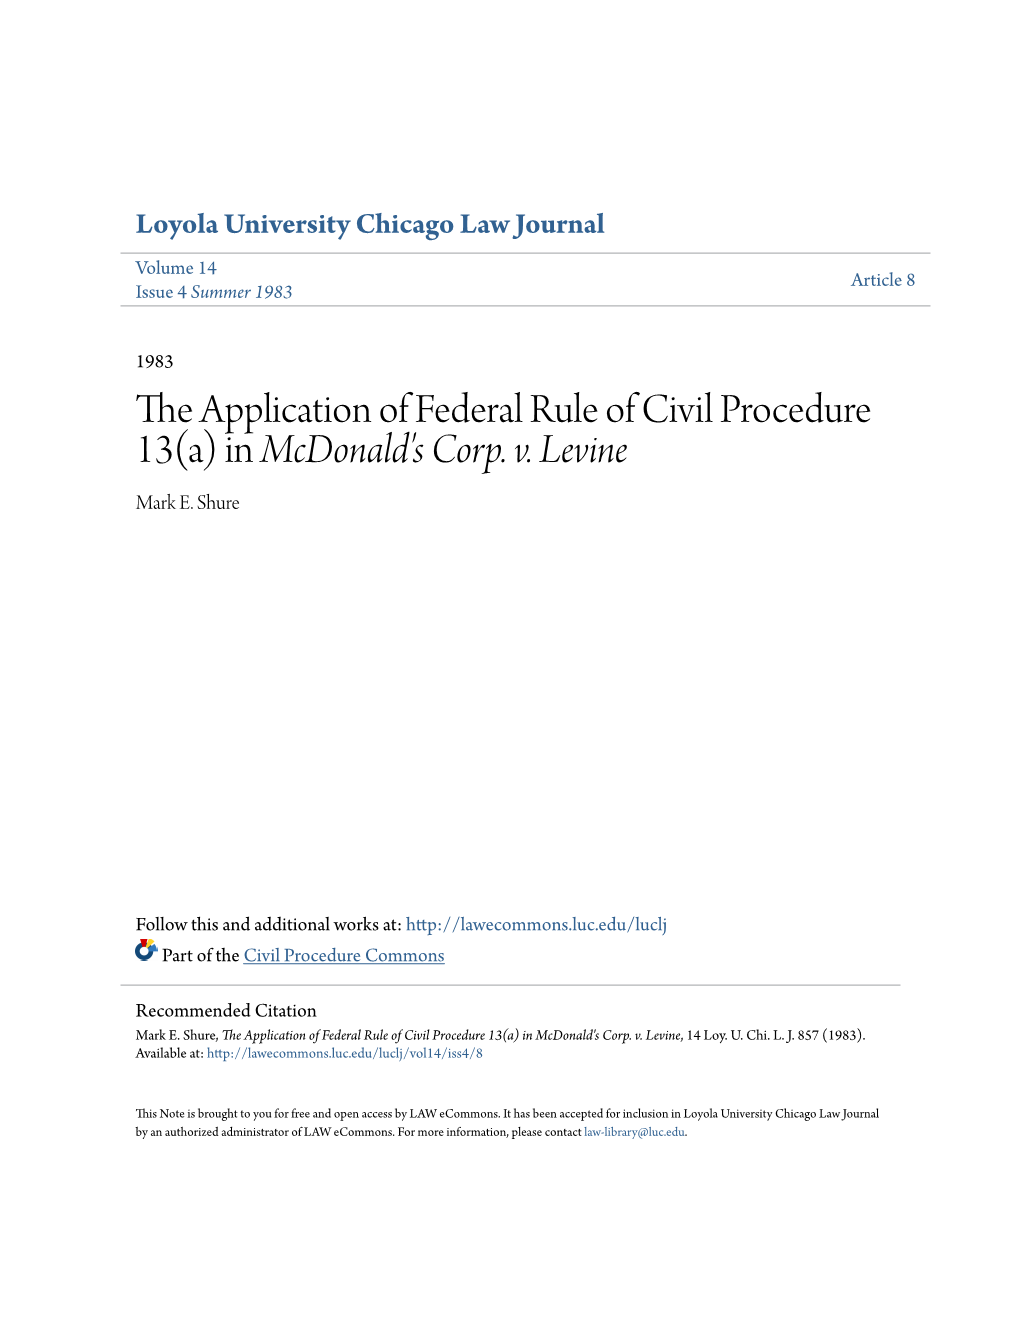 The Application of Federal Rule of Civil Procedure 13(A) in Mcdonald's Corp